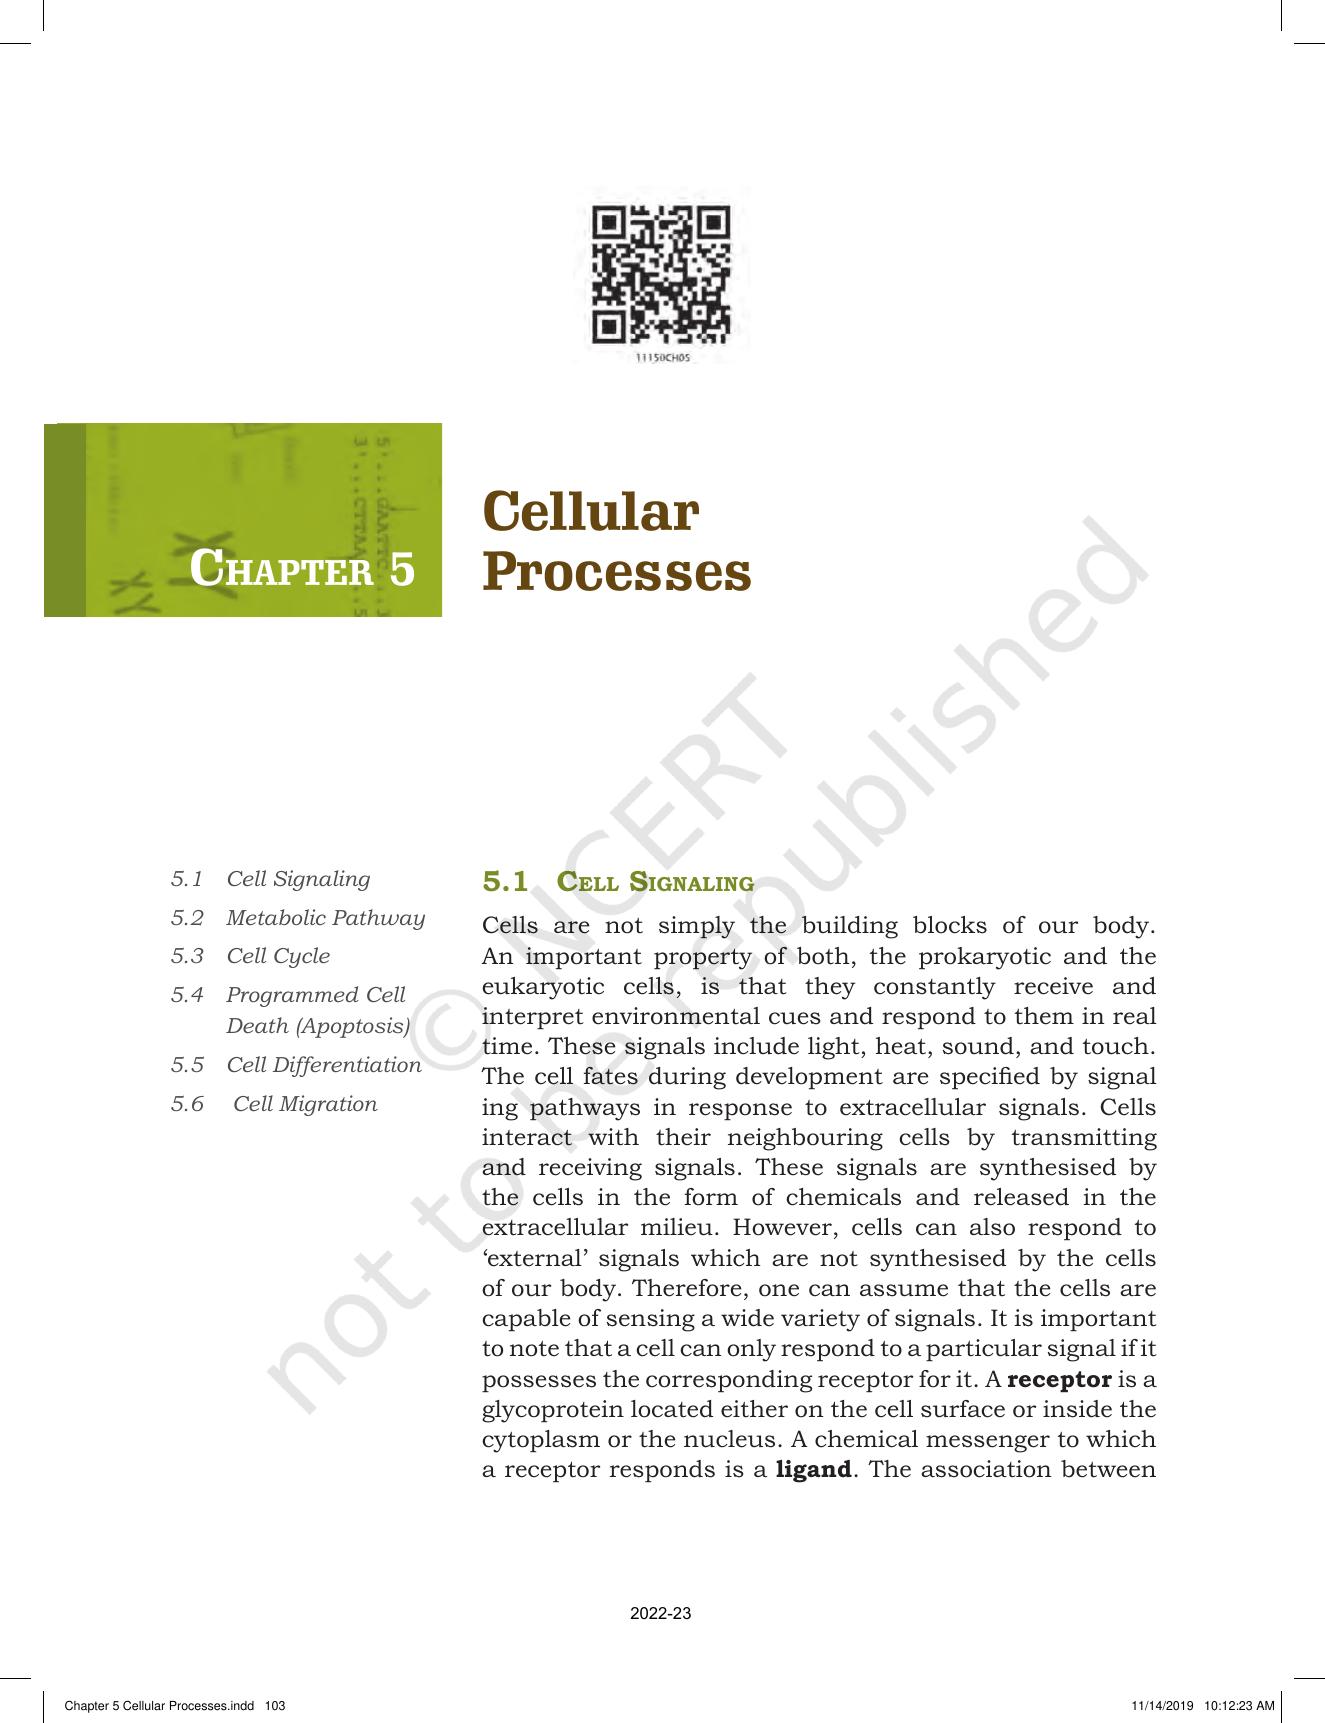 NCERT Book for Class 11 Biotechnology Chapter 5 Cellular Processes - Page 1